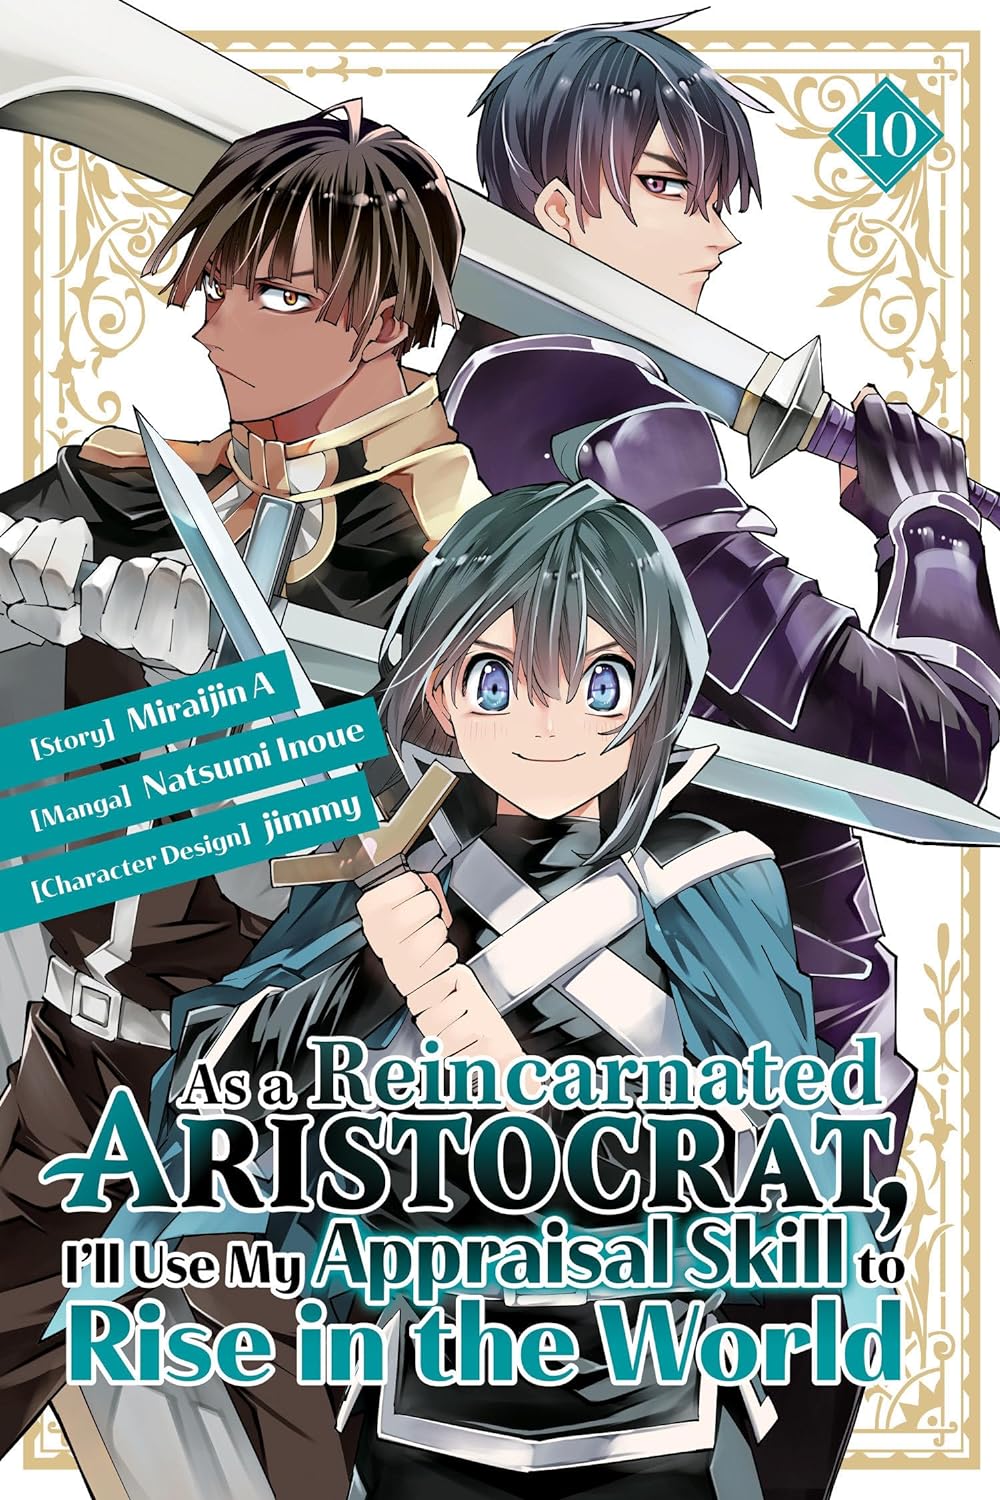 (04/06/2024) As a Reincarnated Aristocrat, I'll Use My Appraisal Skill to Rise in the World (Manga) Vol. 10